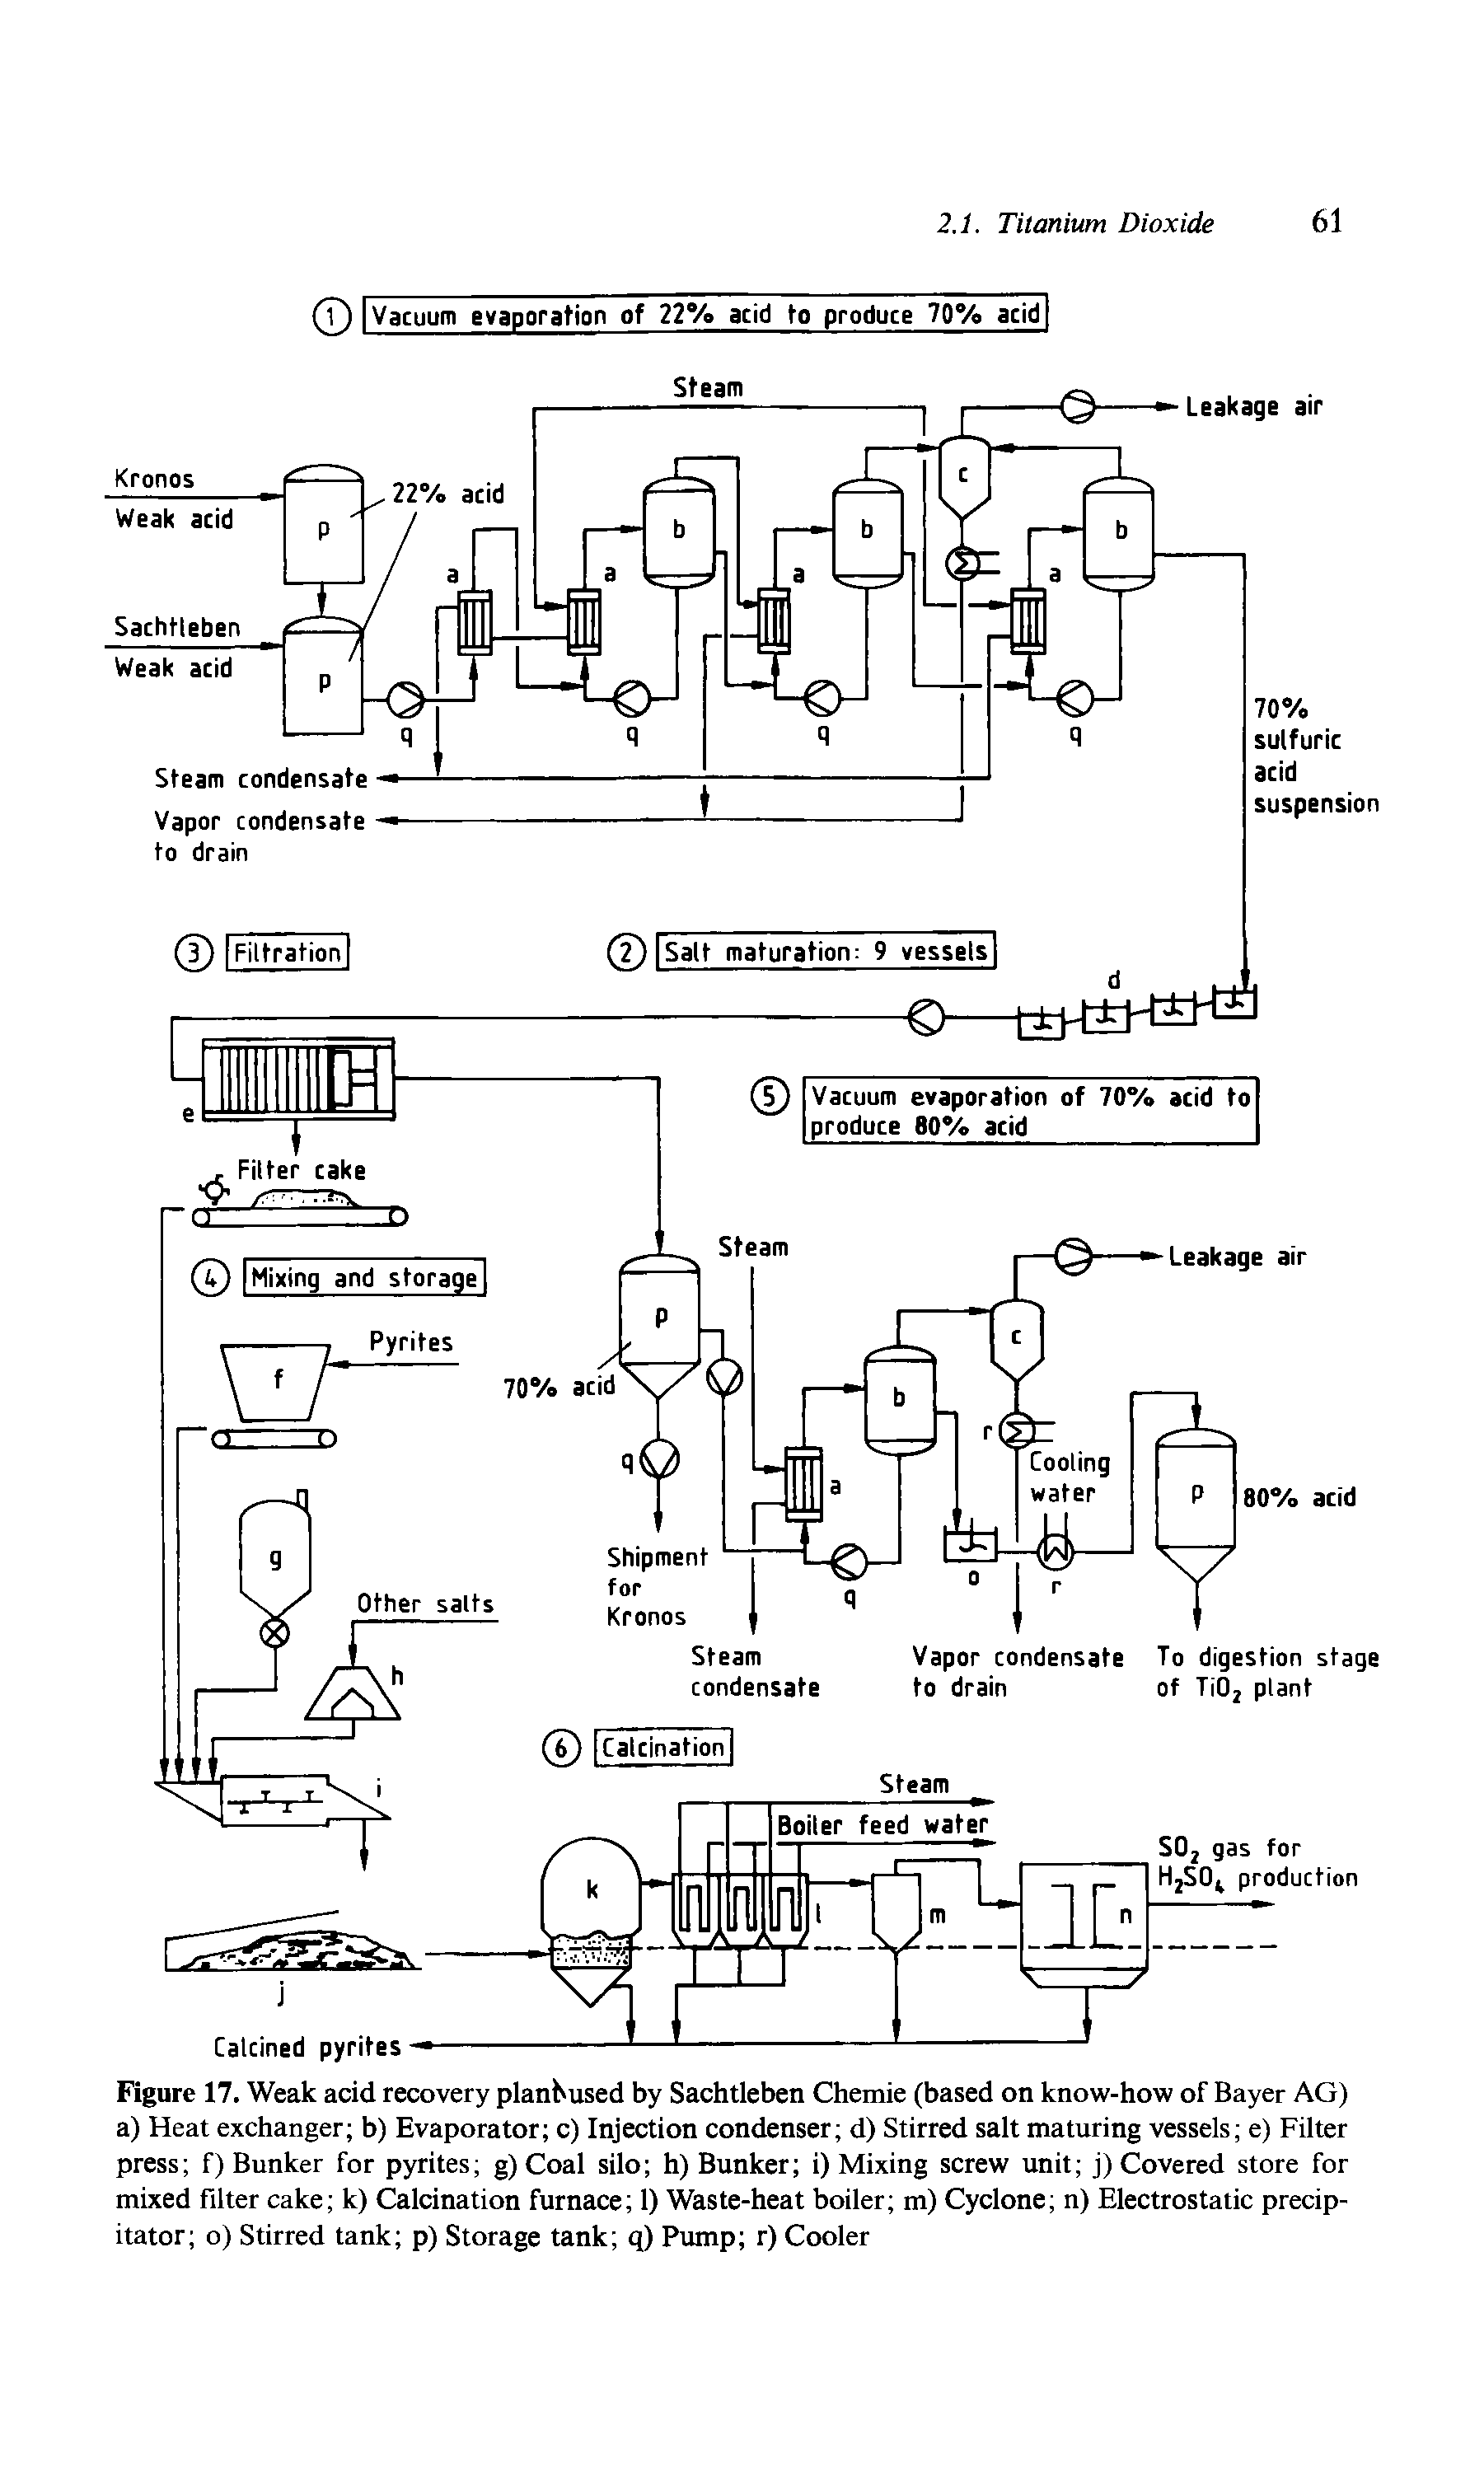 Figure 17. Weak acid recovery plant used by Sachtleben Chemie (based on know-how of Bayer AG) a) Heat exchanger b) Evaporator c) Injection condenser d) Stirred salt maturing vessels e) Filter press f) Bunker for pyrites g) Coal silo h) Bunker i) Mixing screw unit j) Covered store for mixed filter cake k) Calcination furnace 1) Waste-heat boiler m) Cyclone n) Electrostatic precipitator o) Stirred tank p) Storage tank q) Pump r) Cooler...